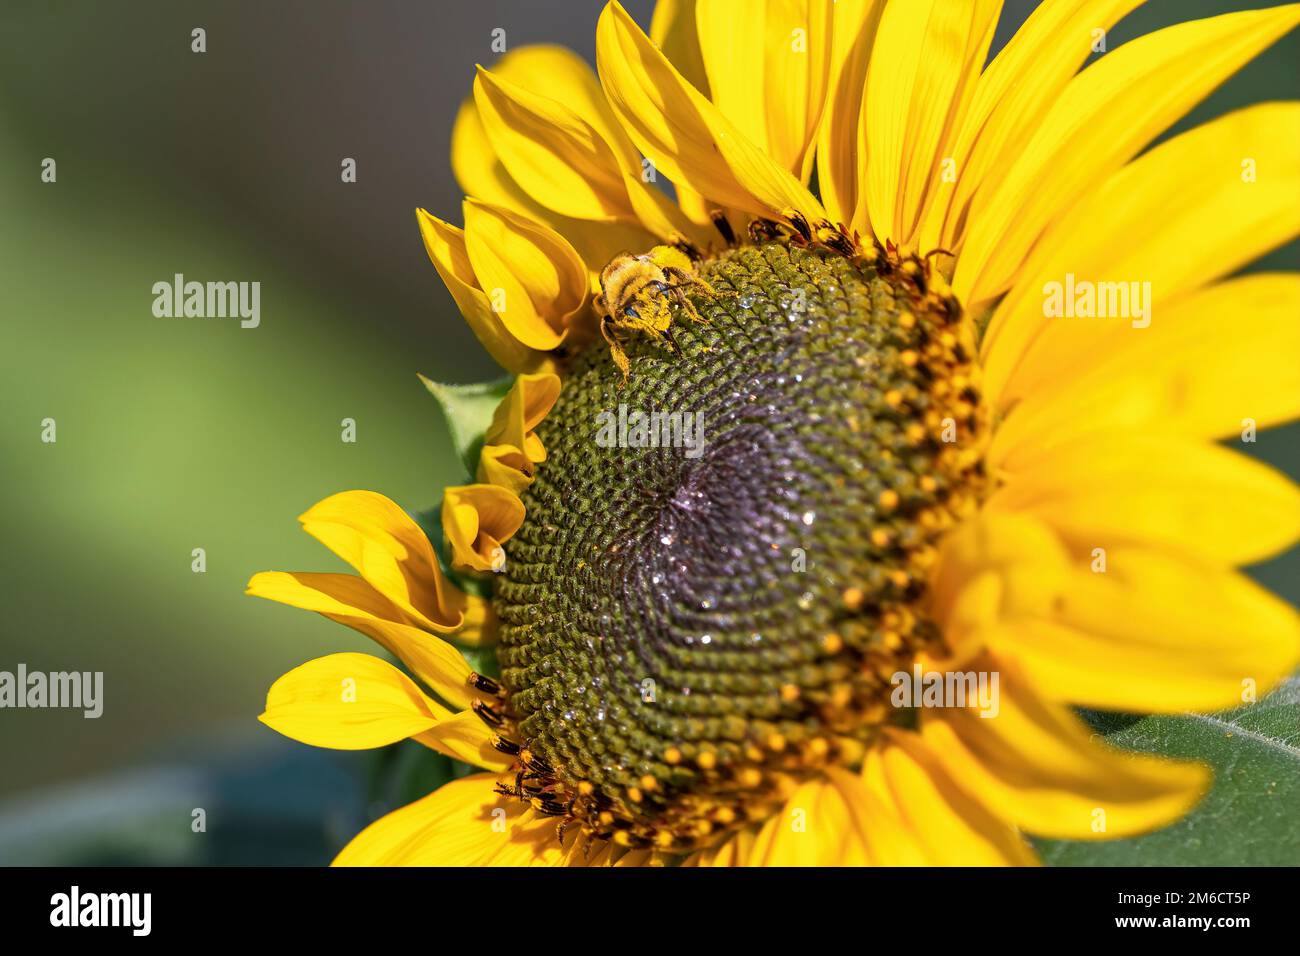 A female Long-horned bee sipping nectar on a large yellow Sunflower head. Stock Photo